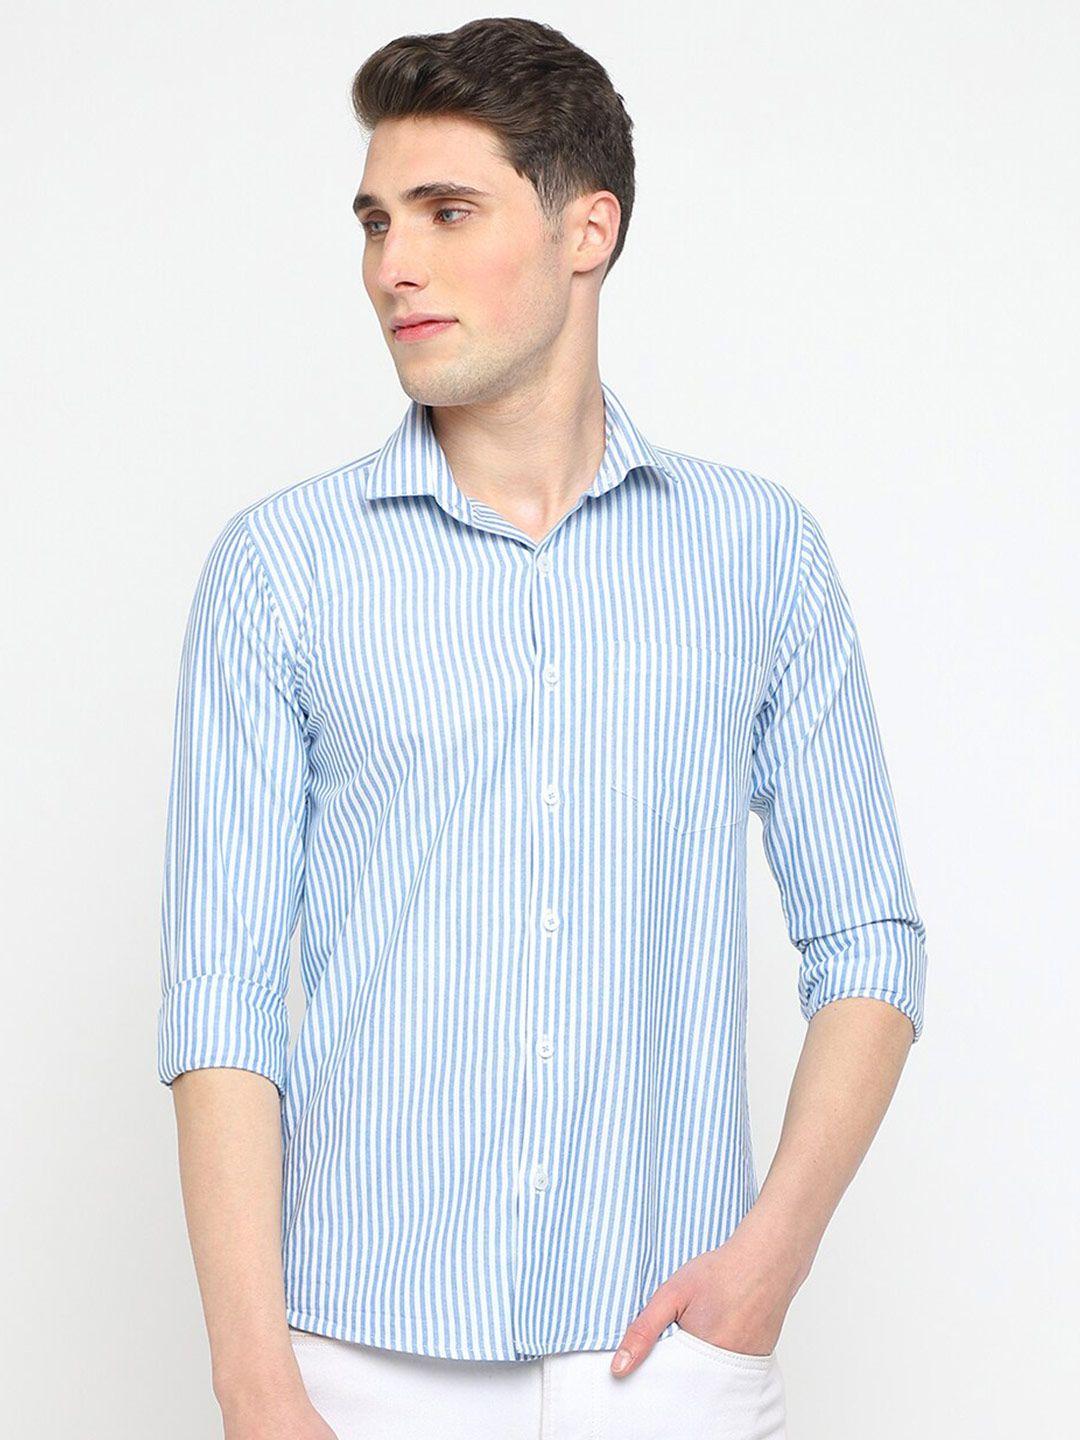 jadeberry-classic-slim-fit-opaque-striped-cotton-formal-shirt